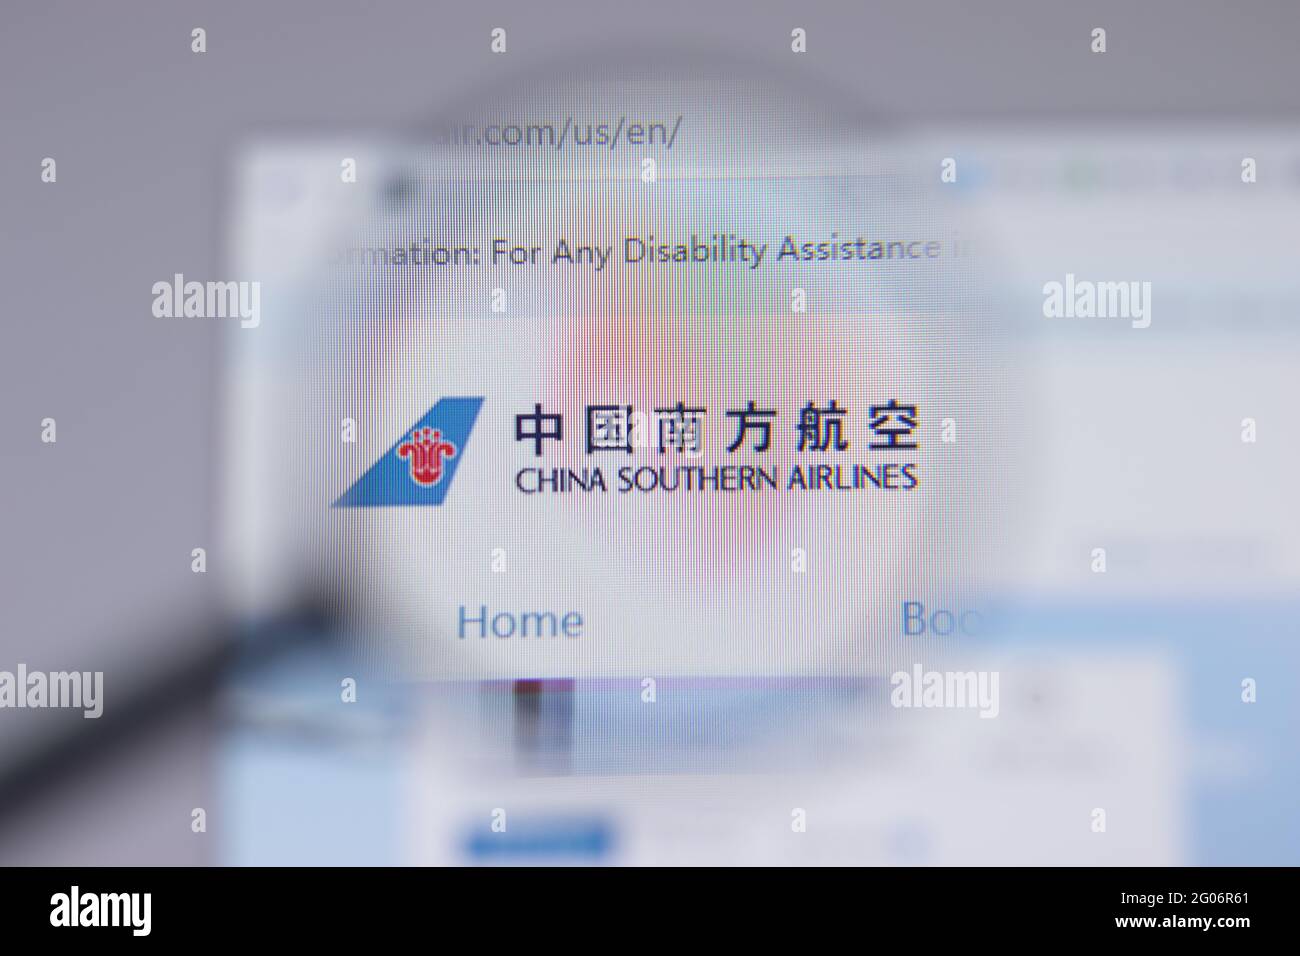 Los Angeles, California, USA - 1 June 2021: China Southern Airlines logo or icon on website page, Illustrative Editorial Stock Photo